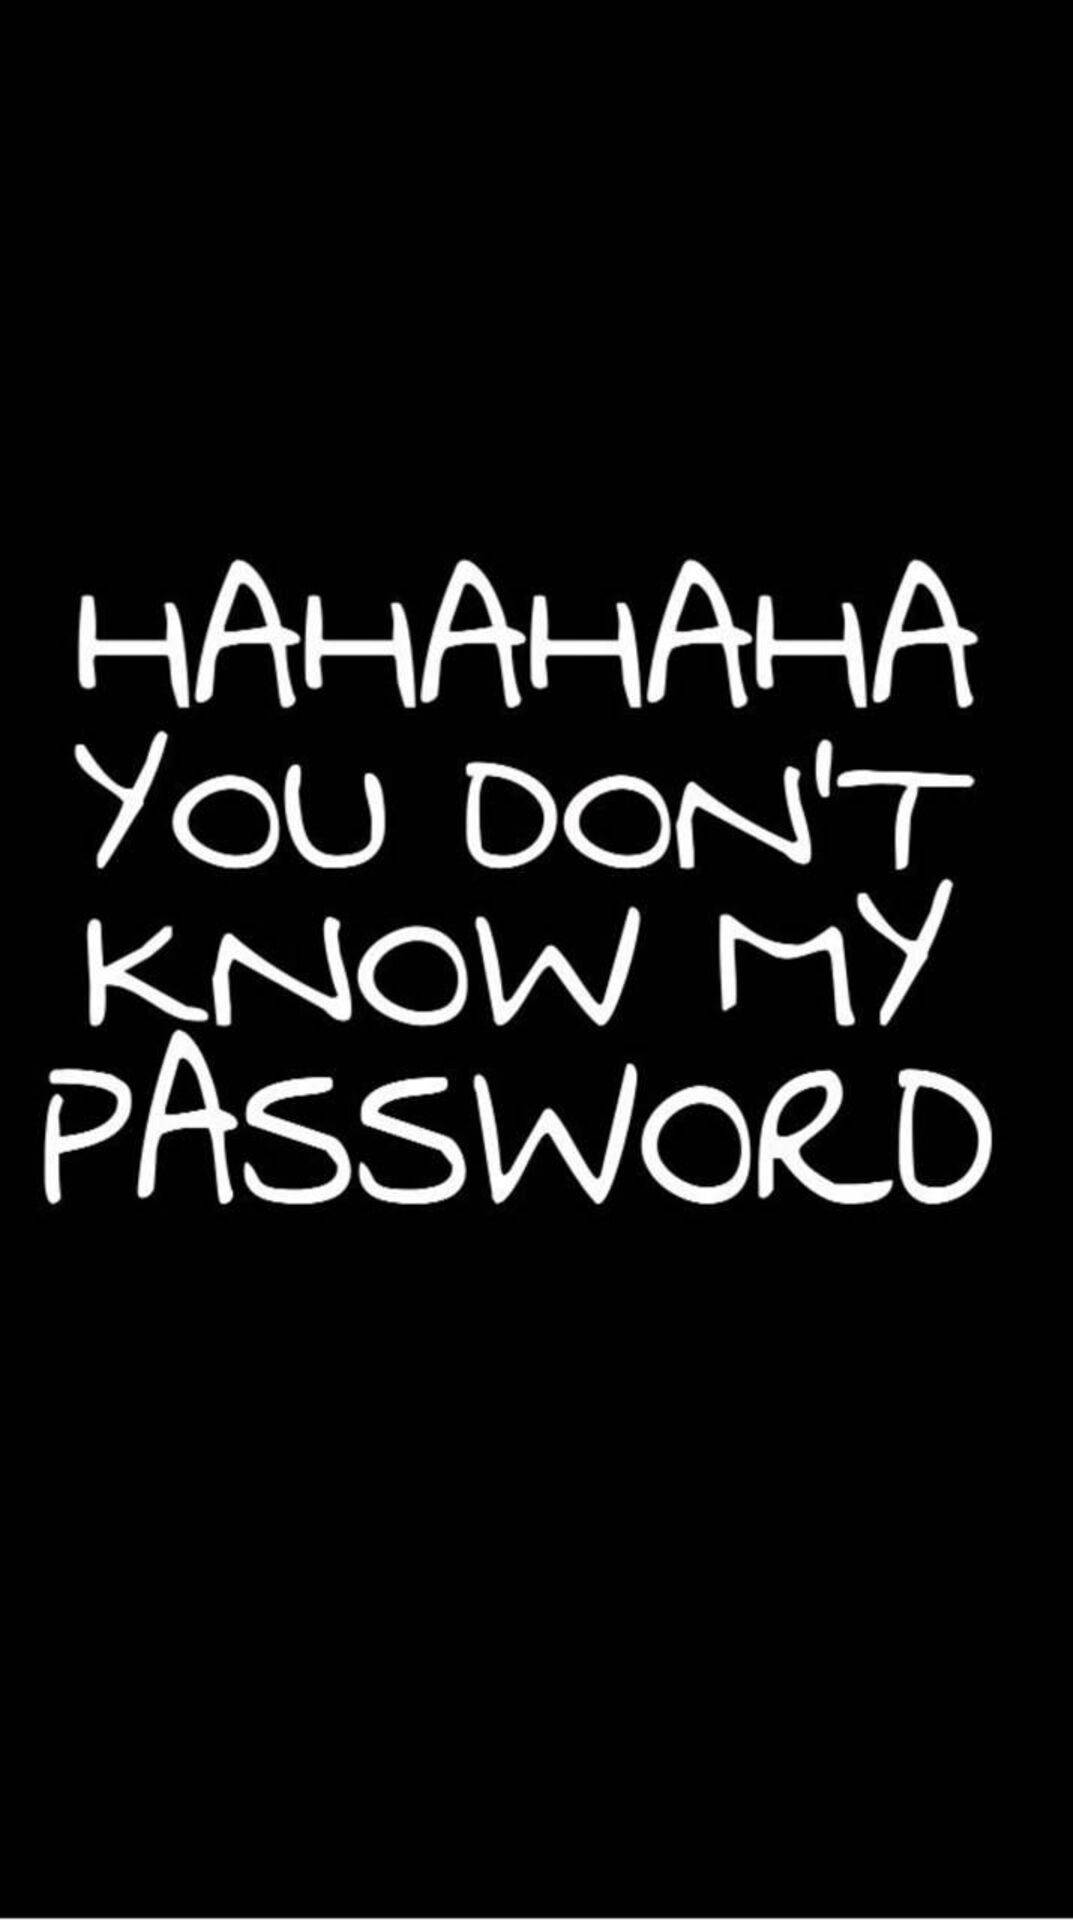 Don't Know Password Home Screen